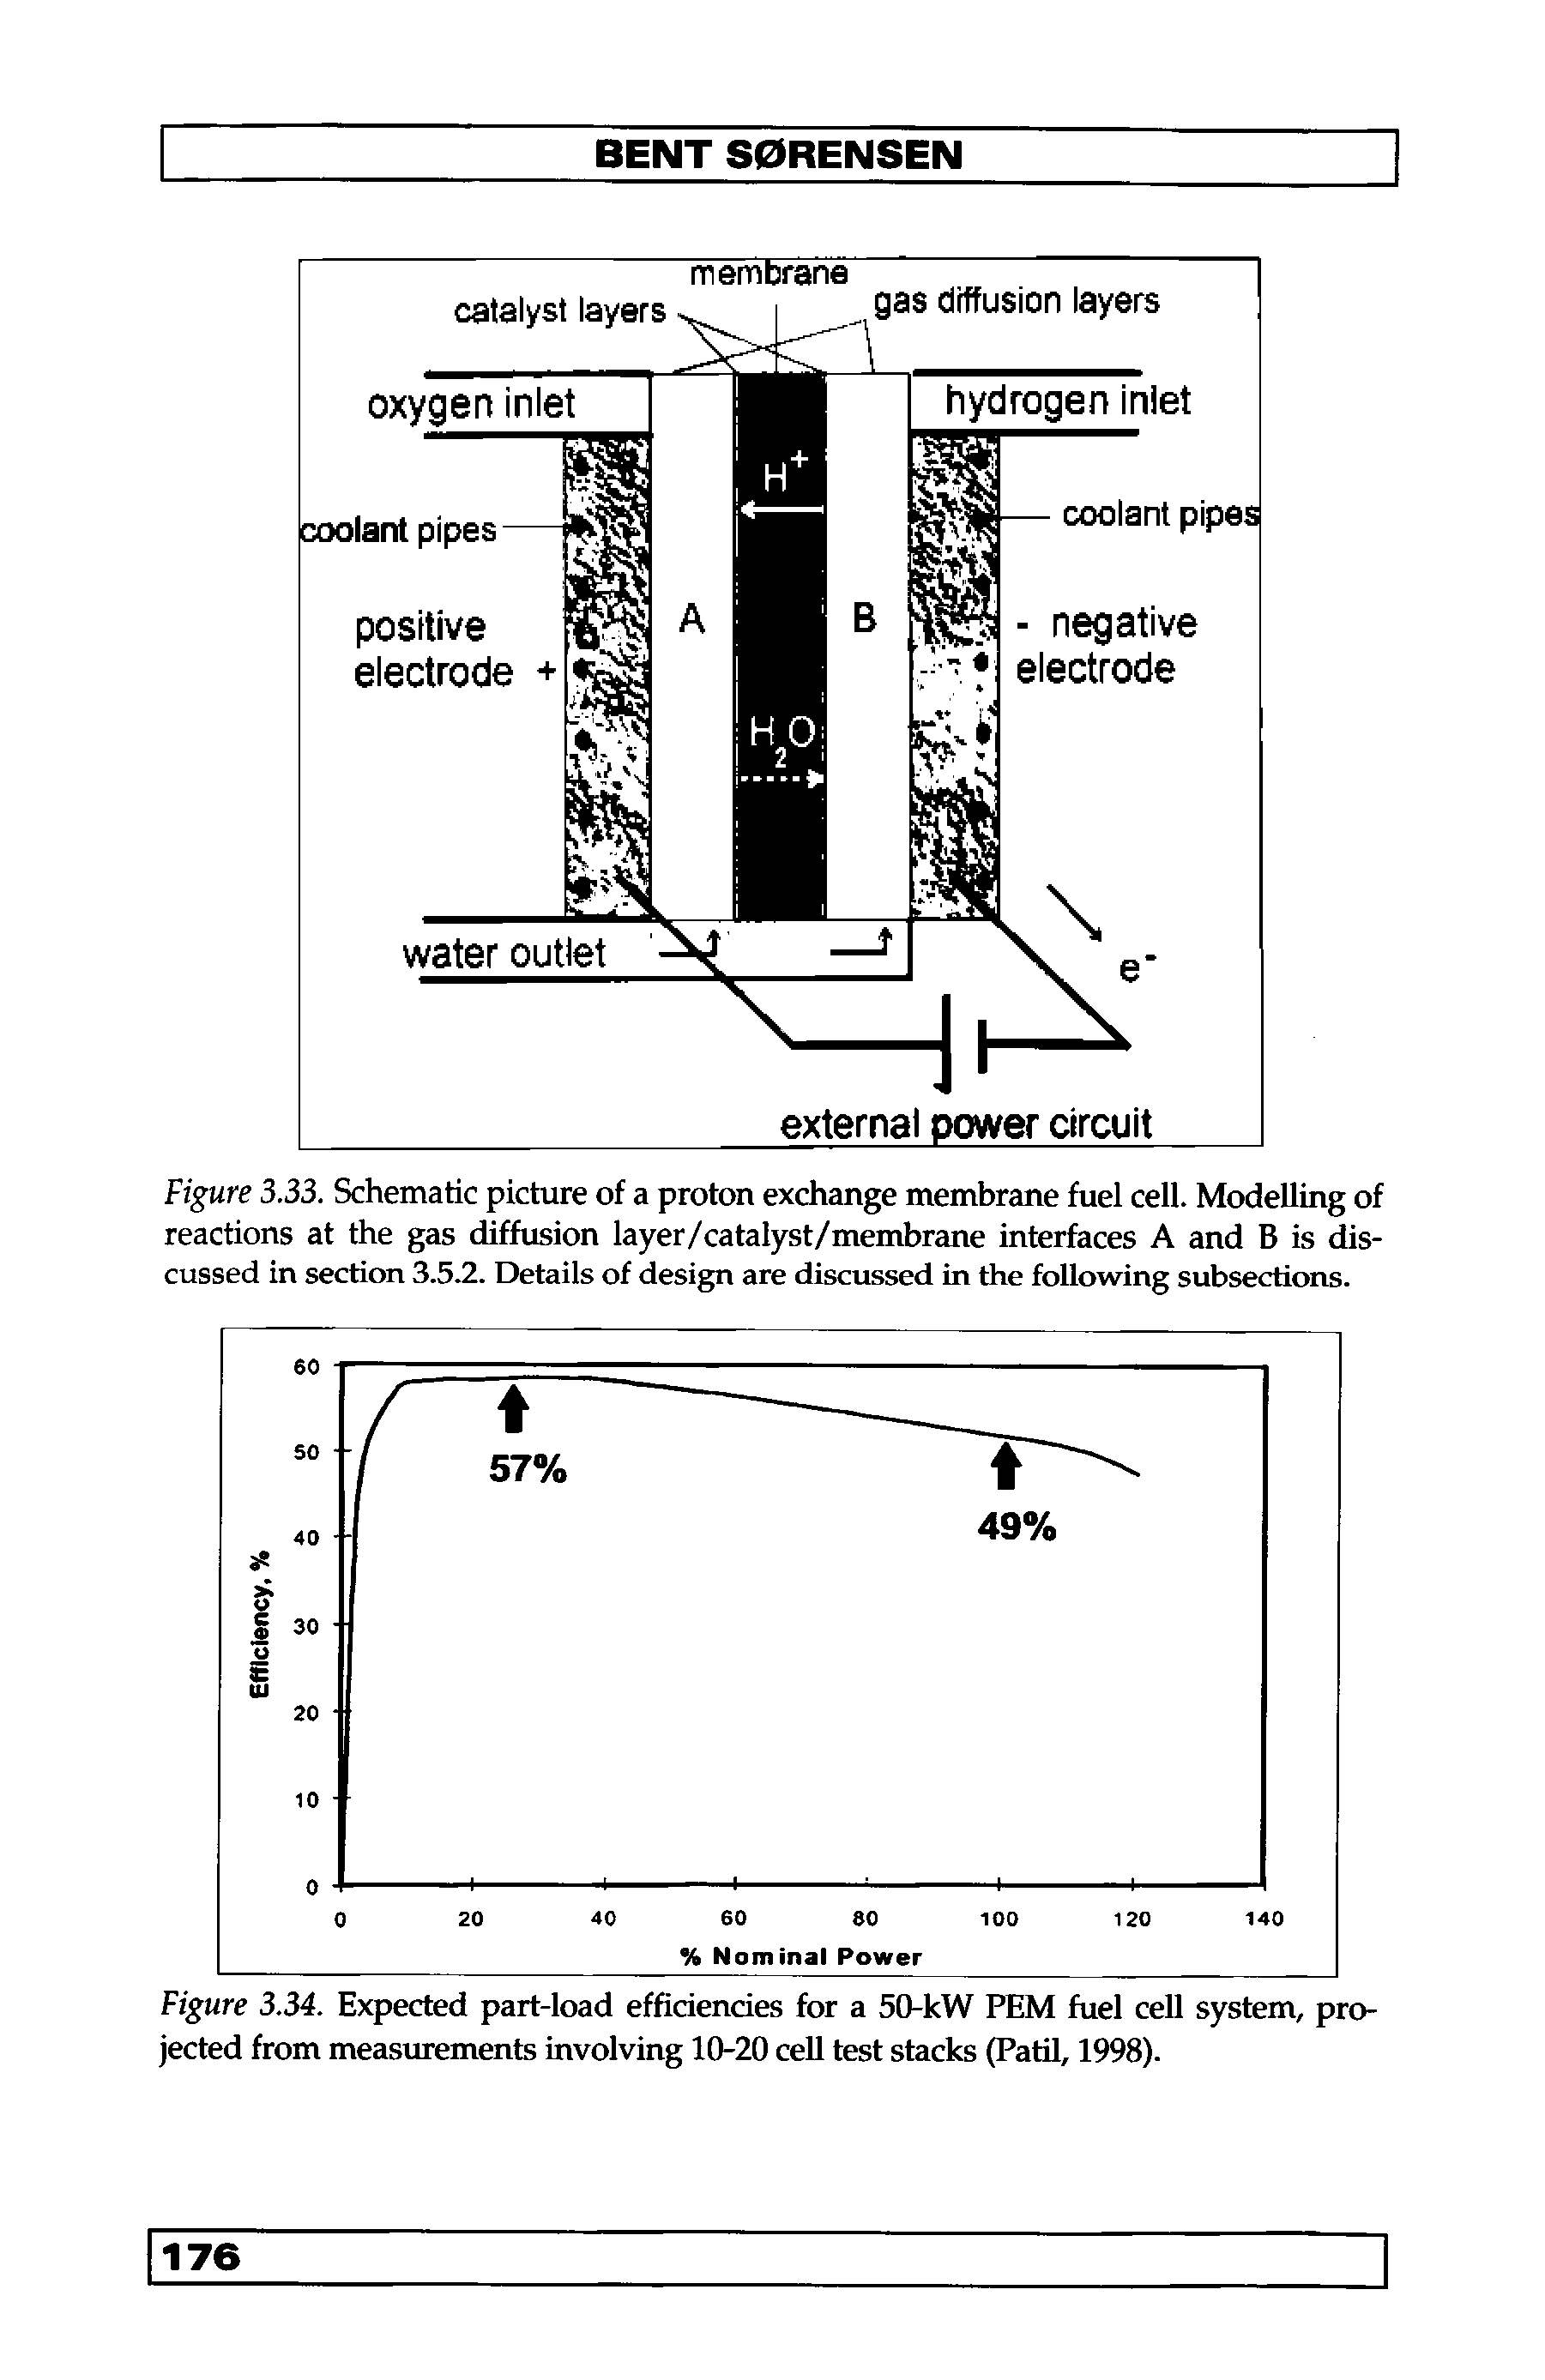 Figure 3.33. Schematic picture of a proton exchange membrane fuel cell. Modelling of reactions at the gas diffusion layer/catalyst/membrane interfaces A and B is discussed in section 3.5.2. Details of design are discussed in the following subsections.